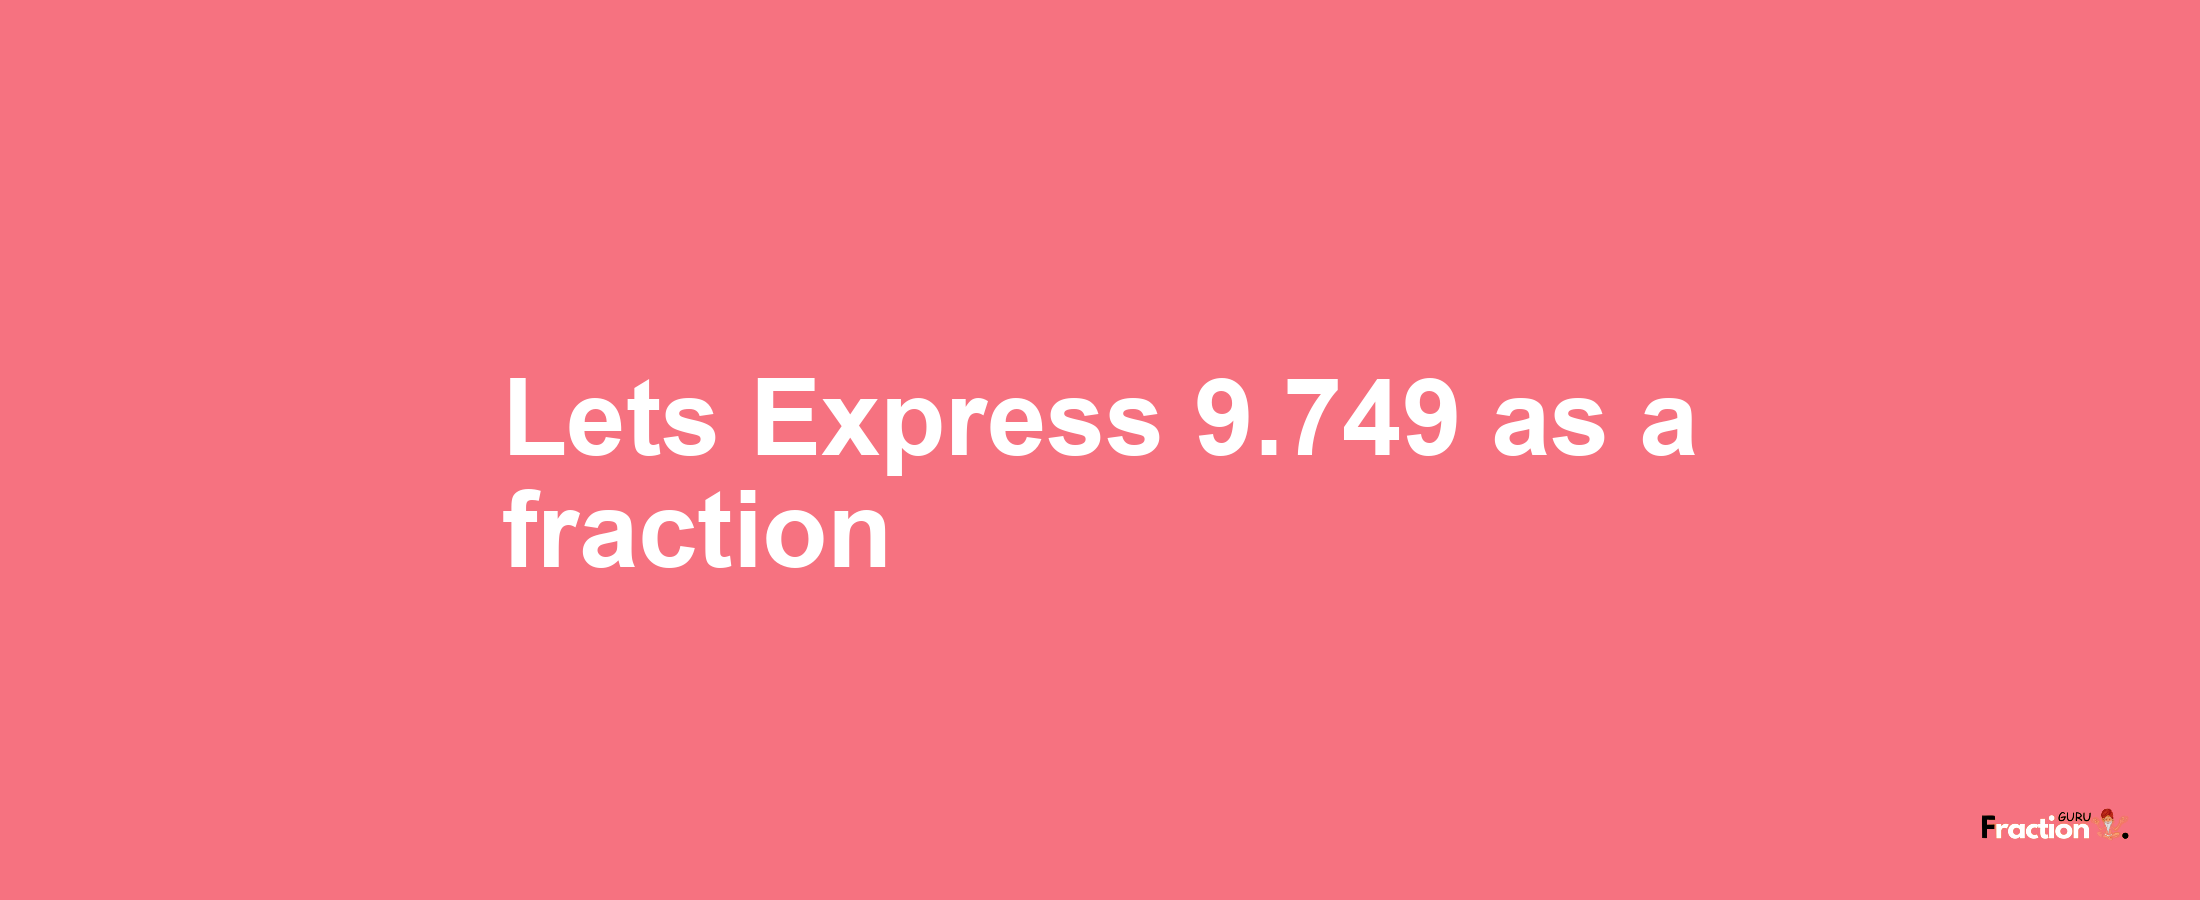 Lets Express 9.749 as afraction